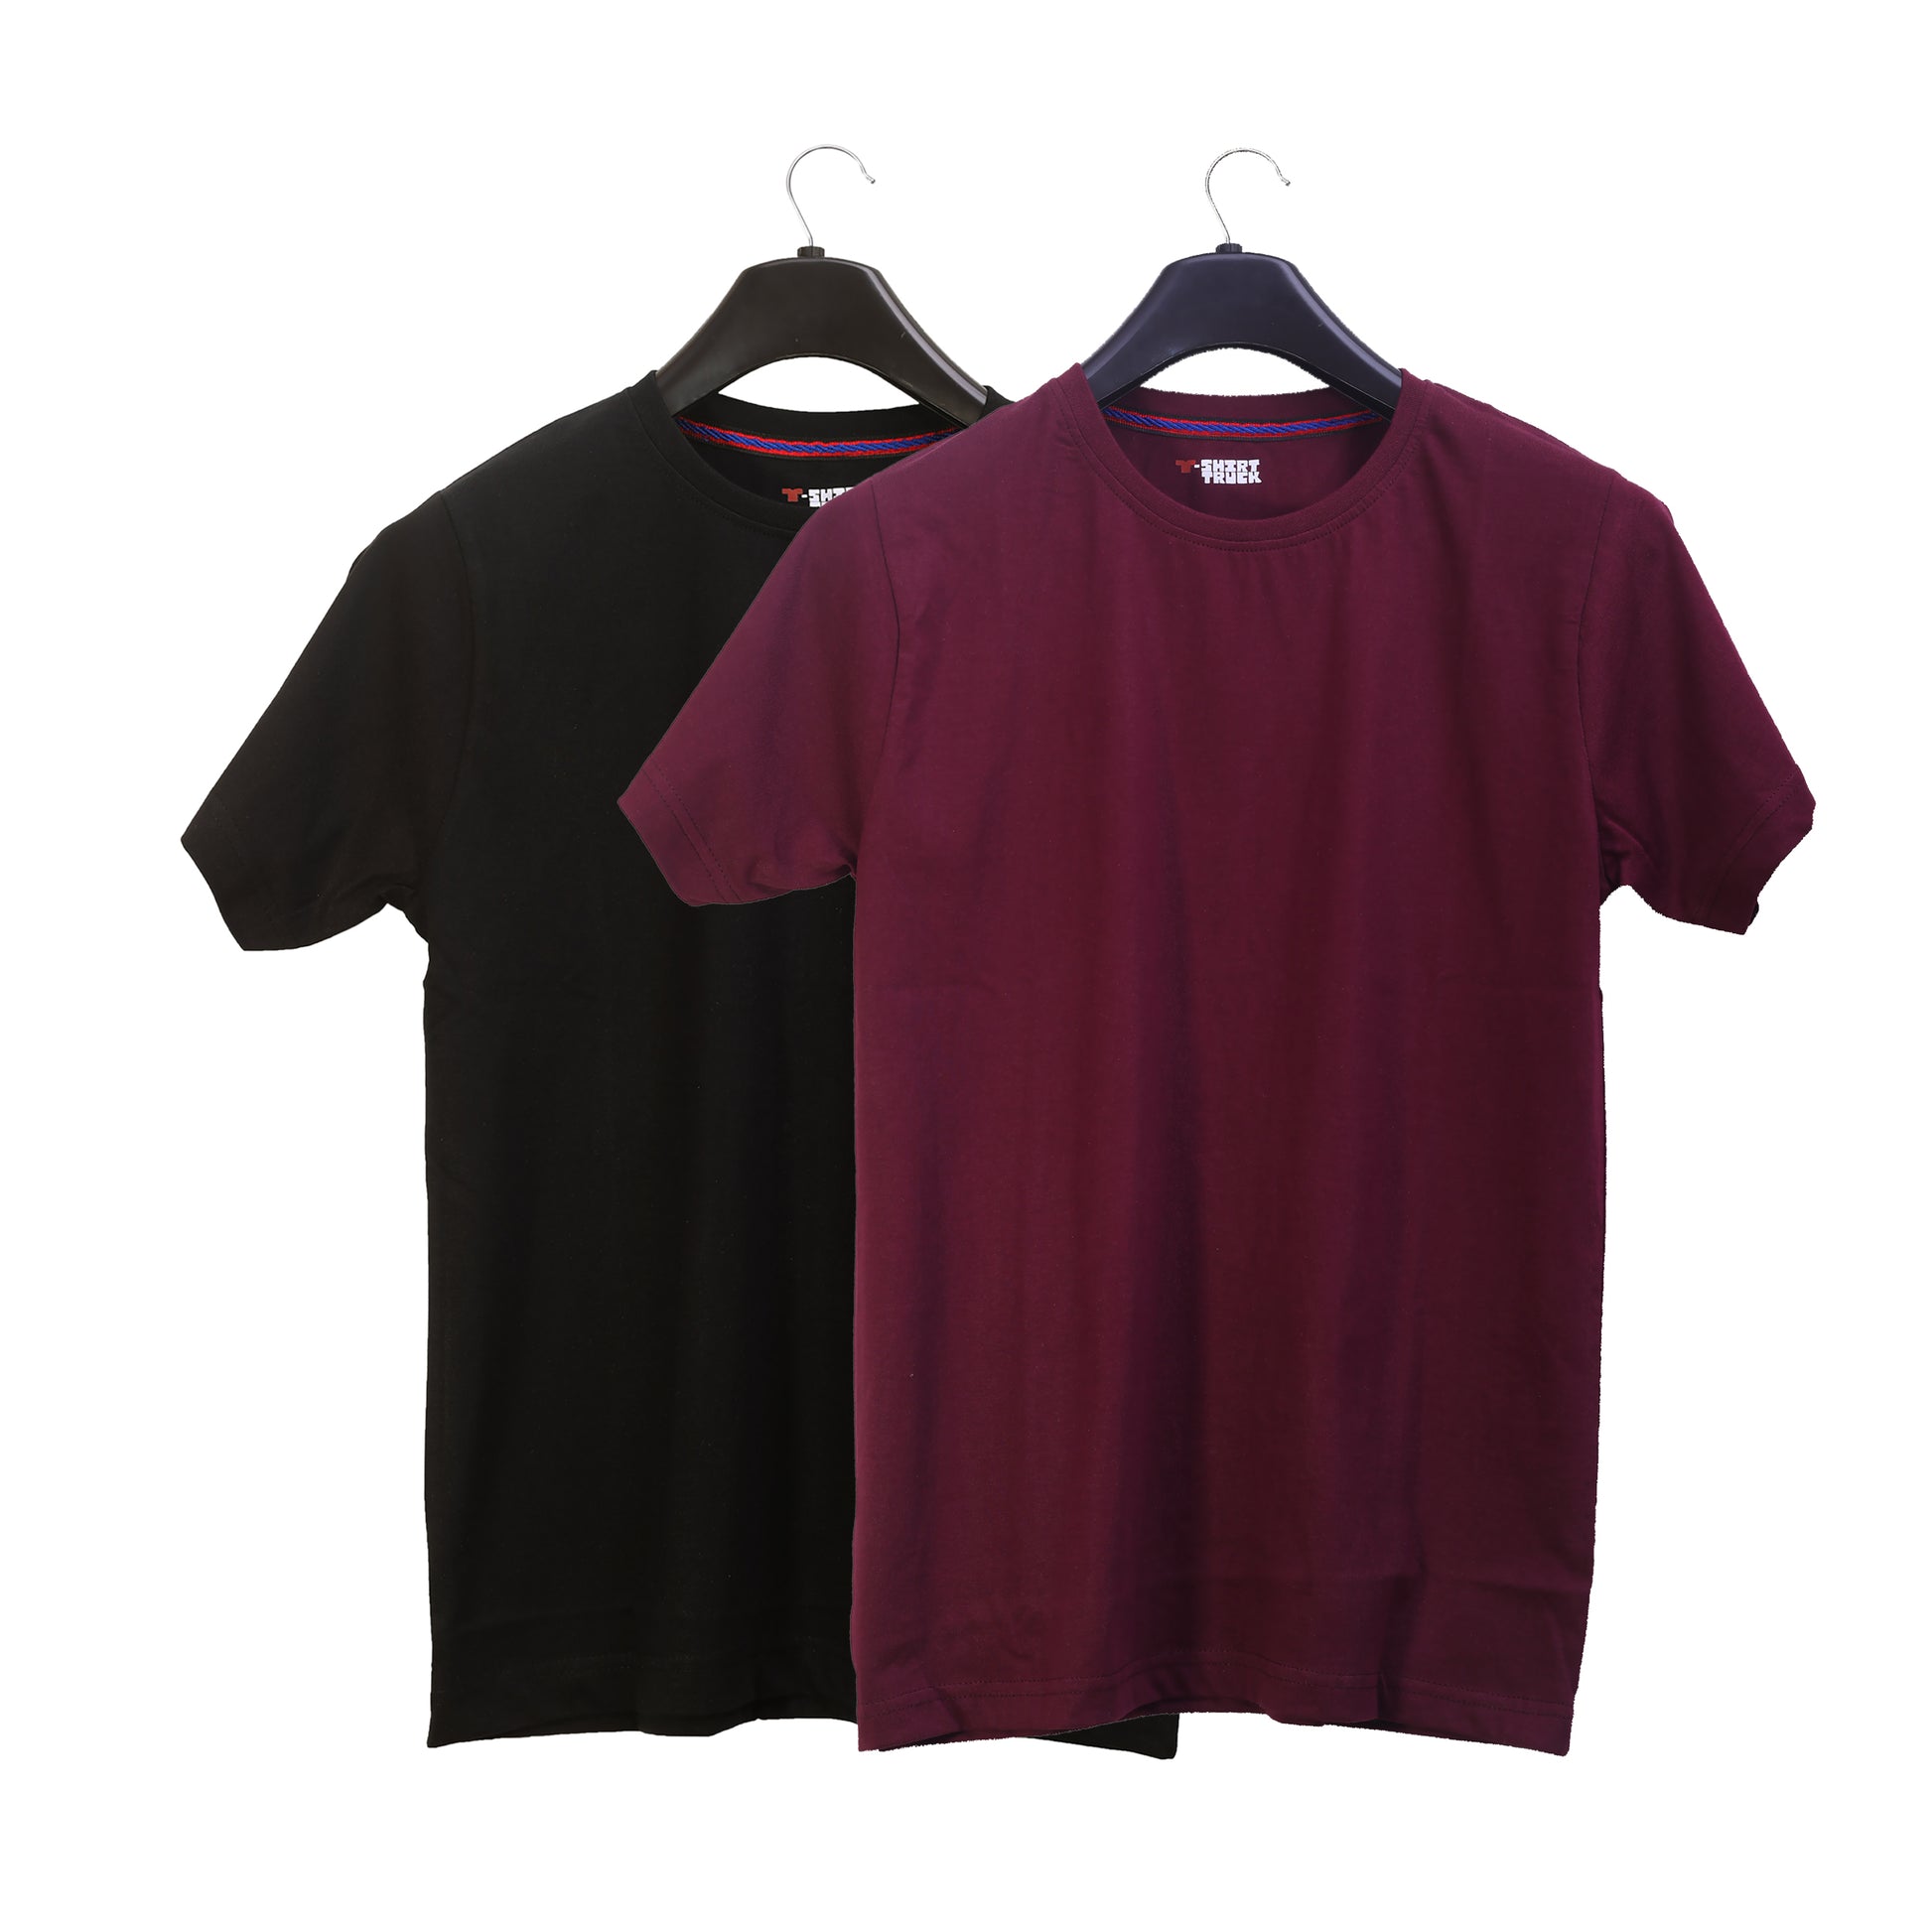 Unisex Round Neck Plain Solid Combo Pack of 2 T-shirts Black & Maroon